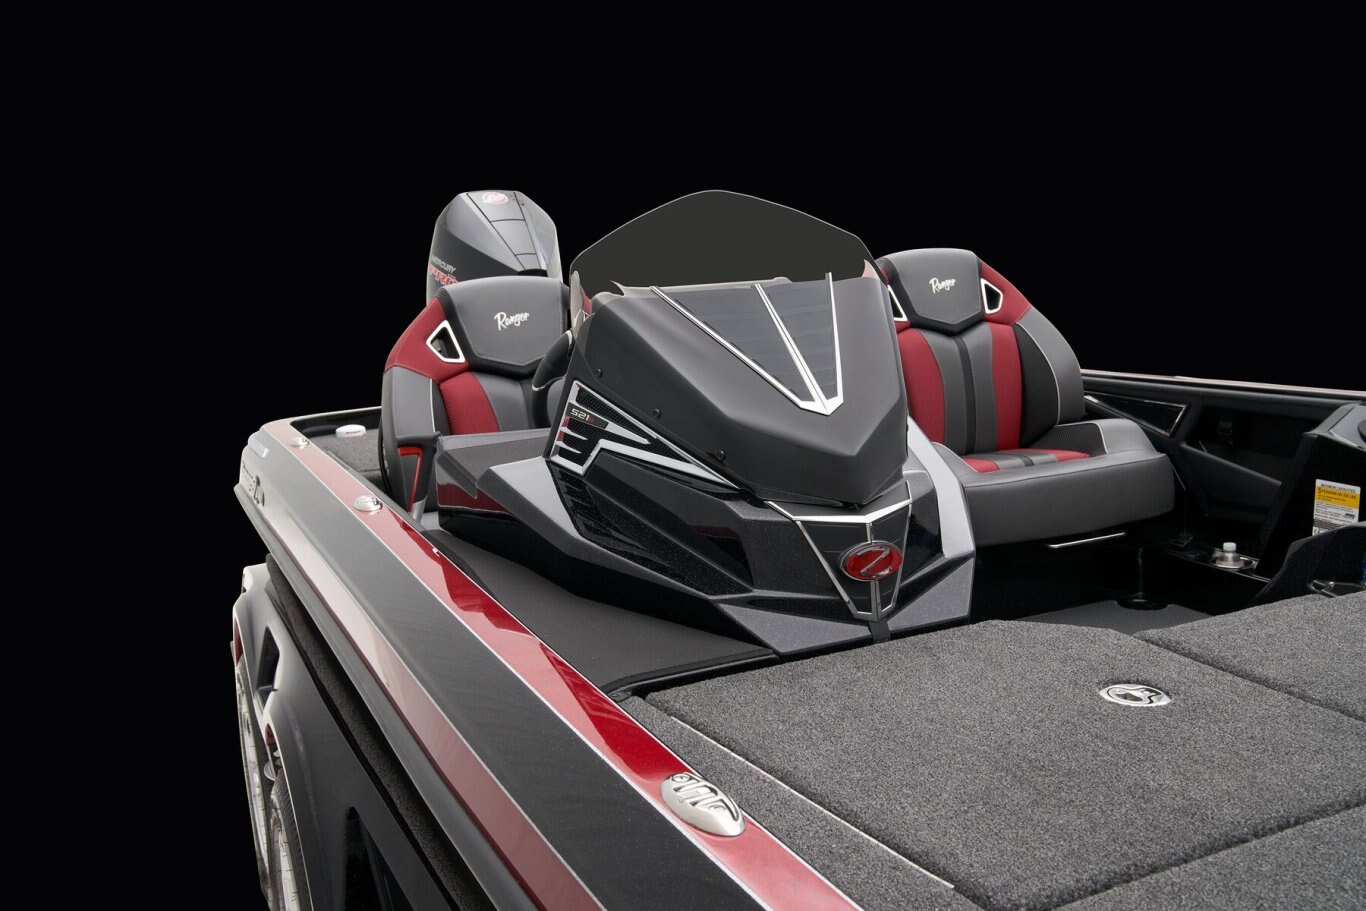 2024 Ranger Z521R CUP EQUIPPED Z COMANCHE SERIES